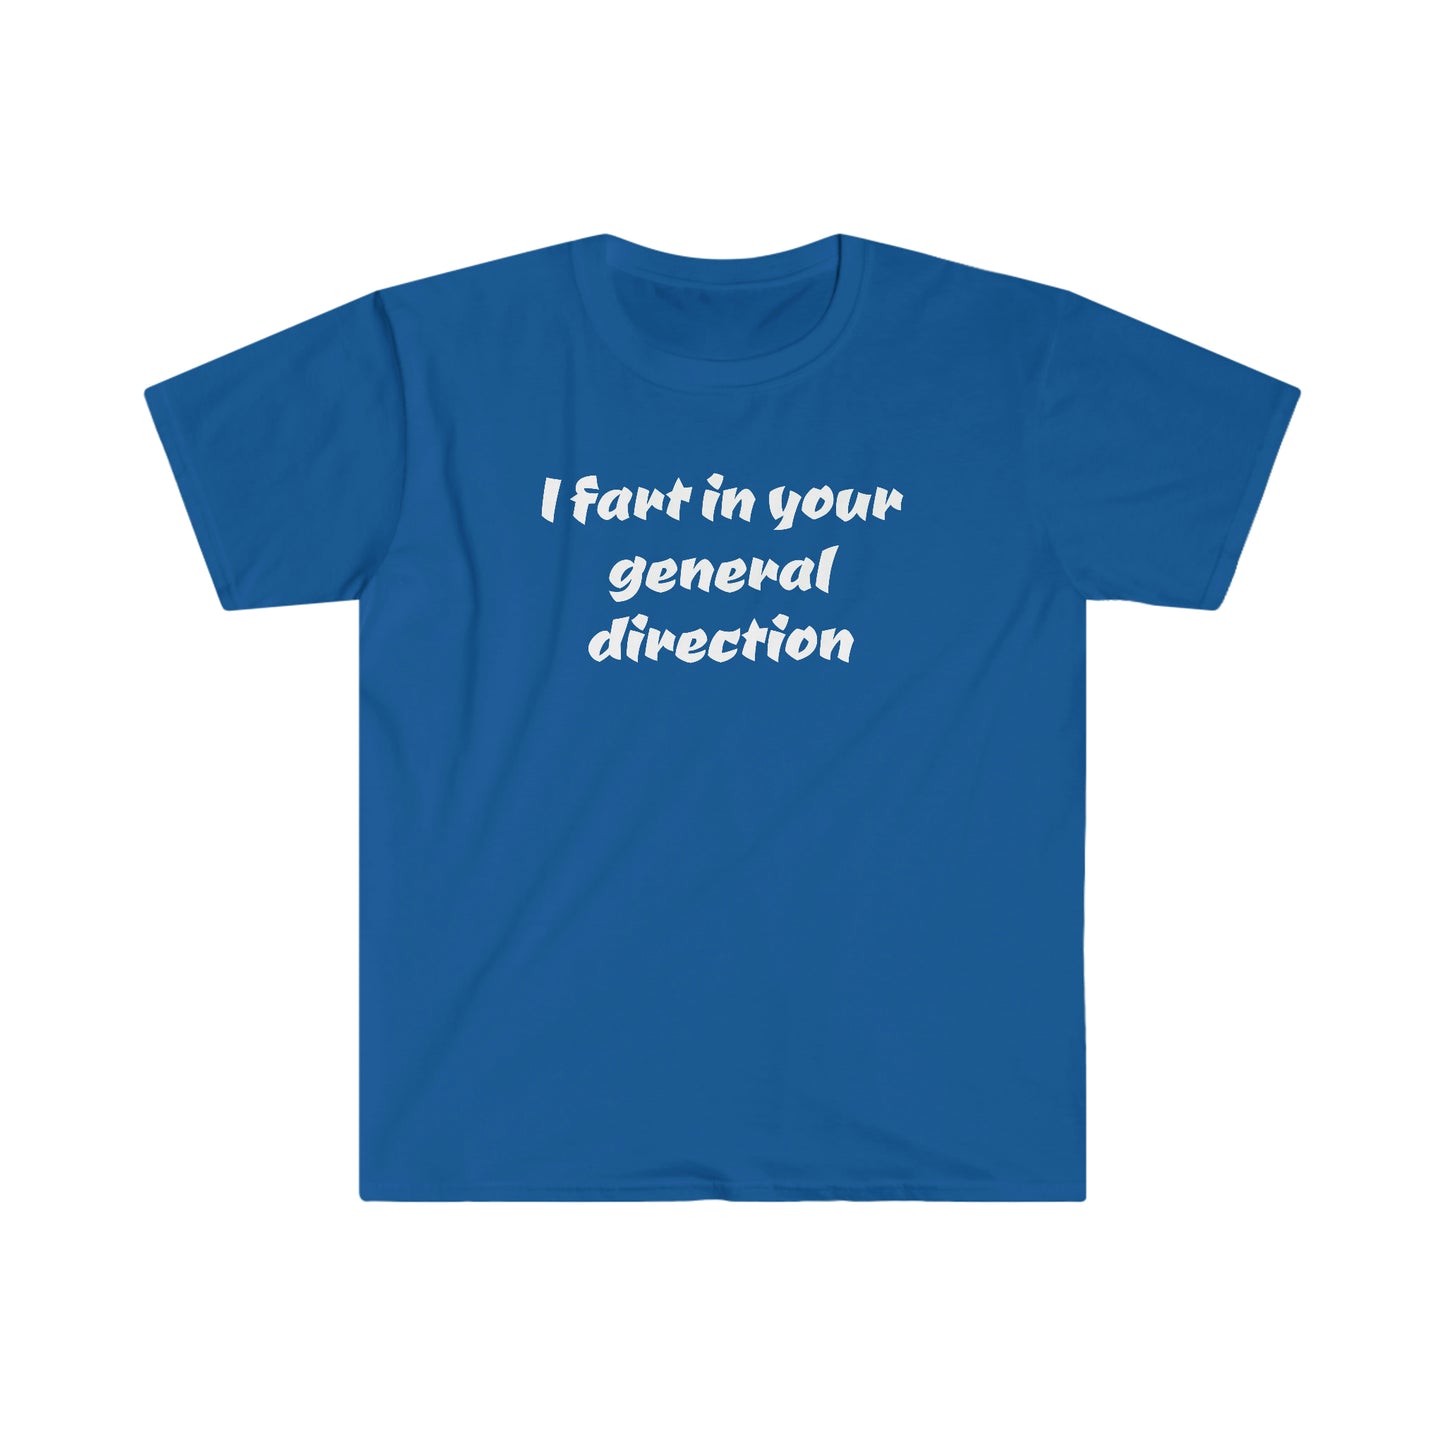 Monty Python "I fart in your general direction" Softstyle T-Shirt